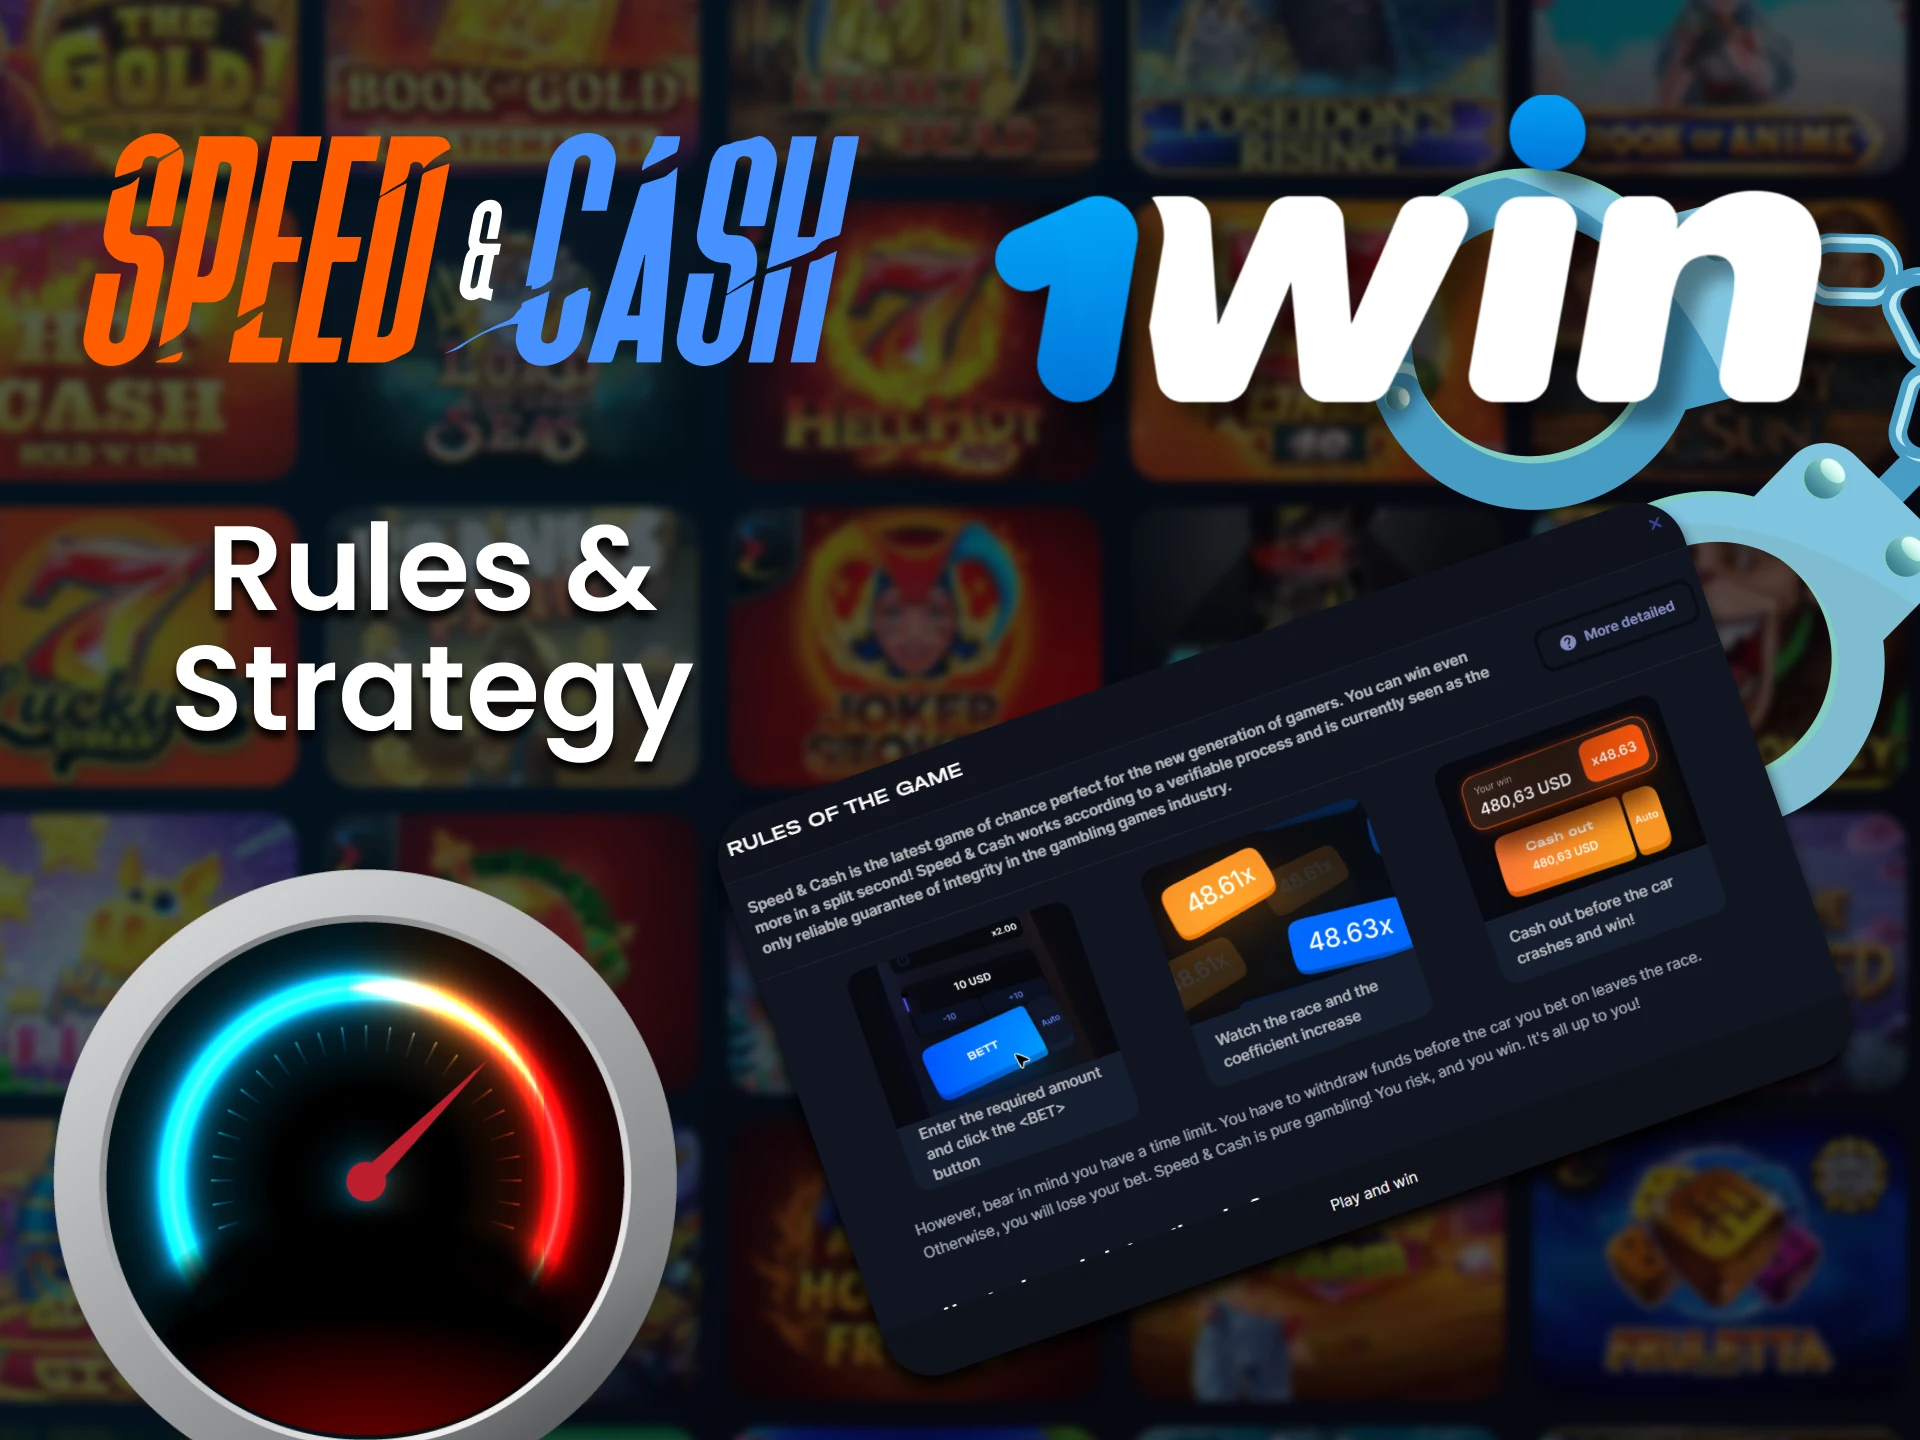 Learn the rules of the Speed & Cash game from 1Win.